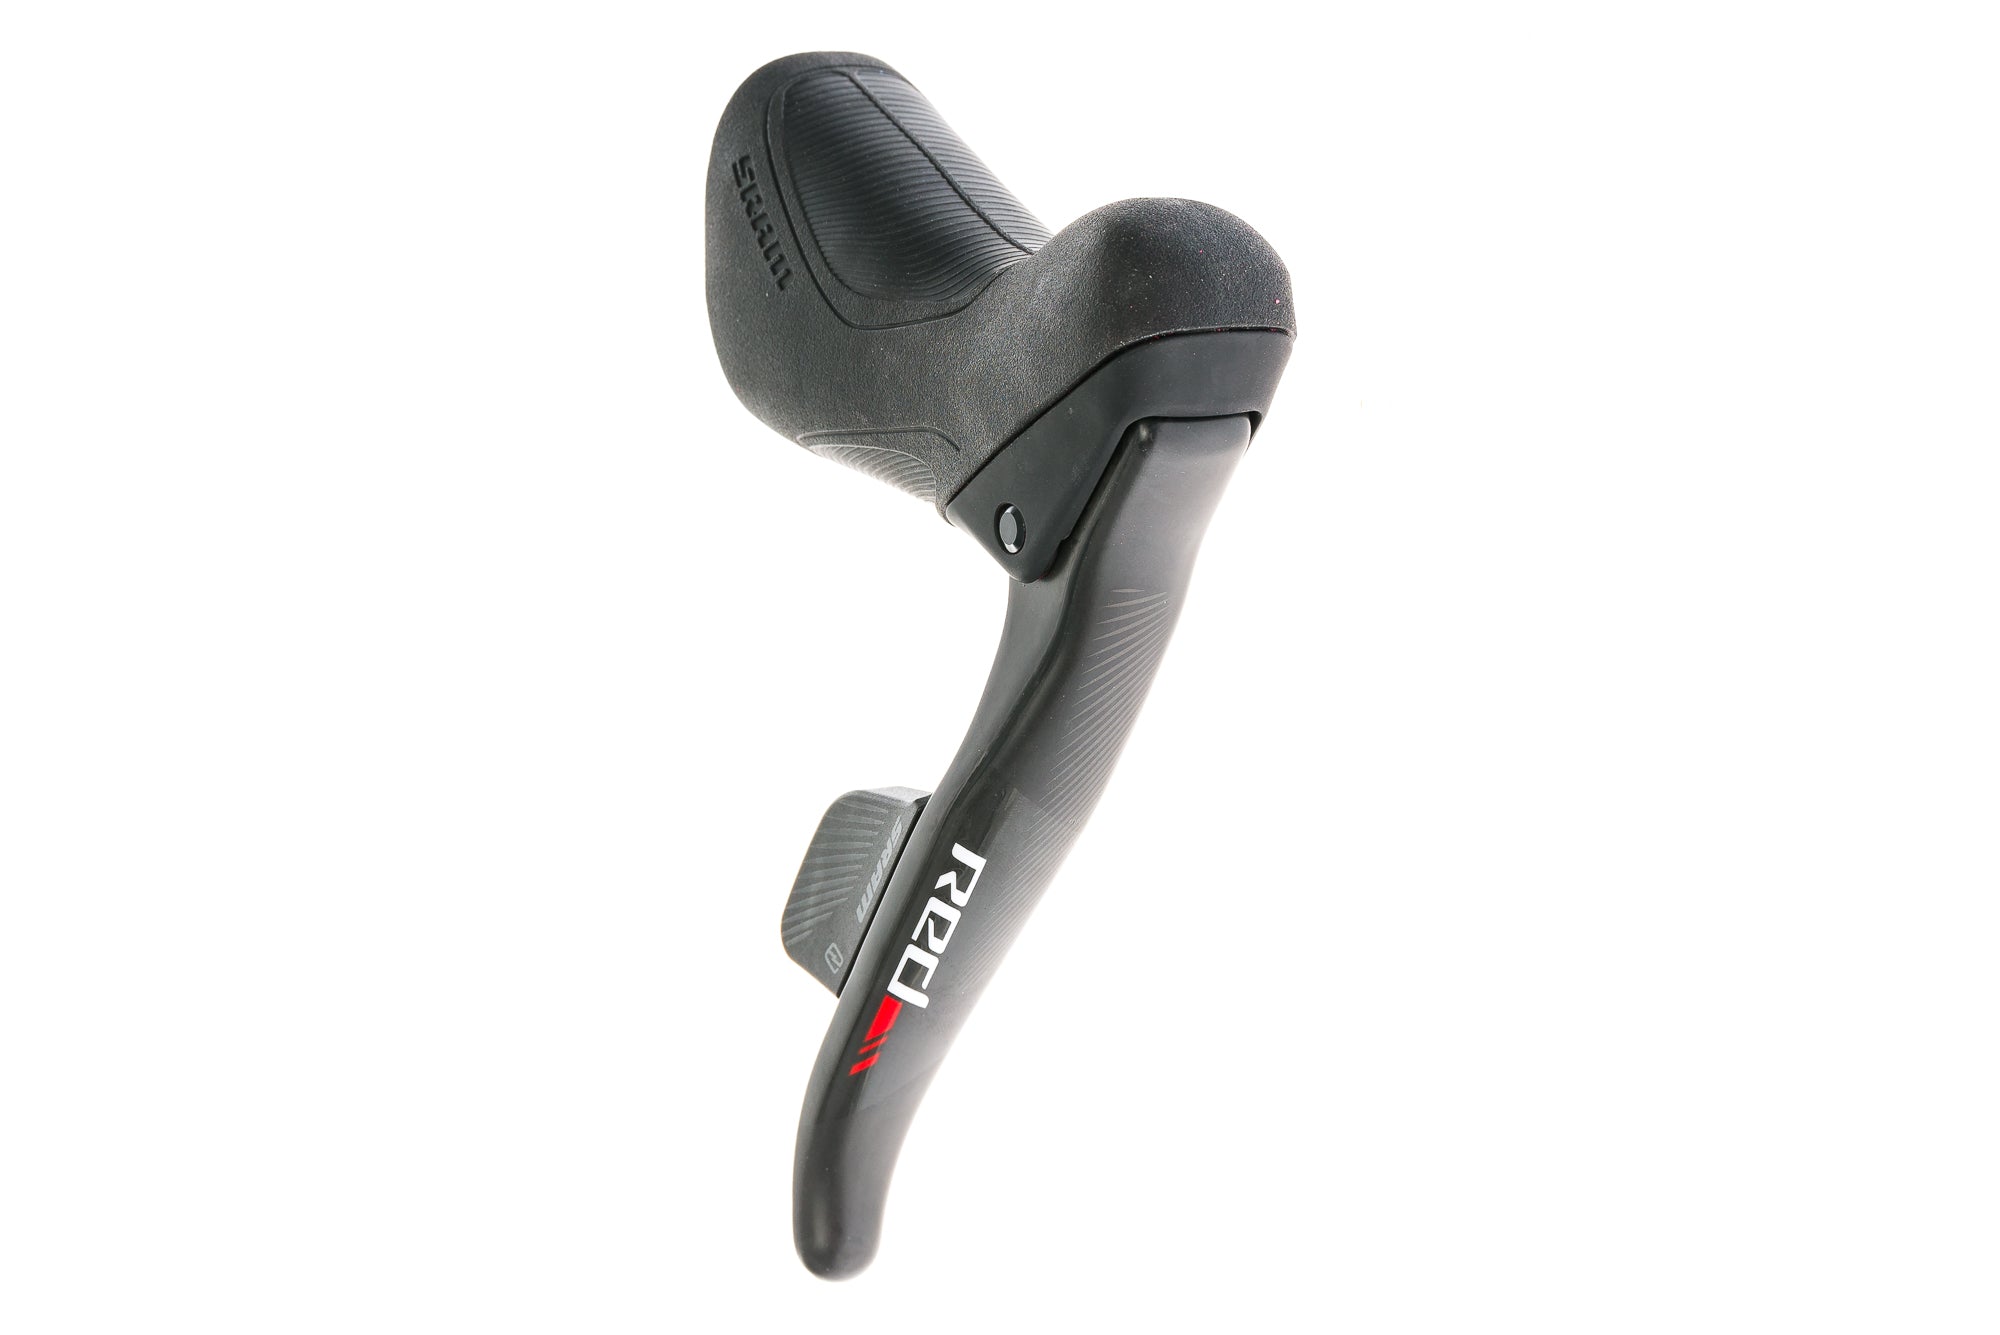 SRAM Red eTap Right/Rear Shifter Lever 2x11 Speed - Good drive side